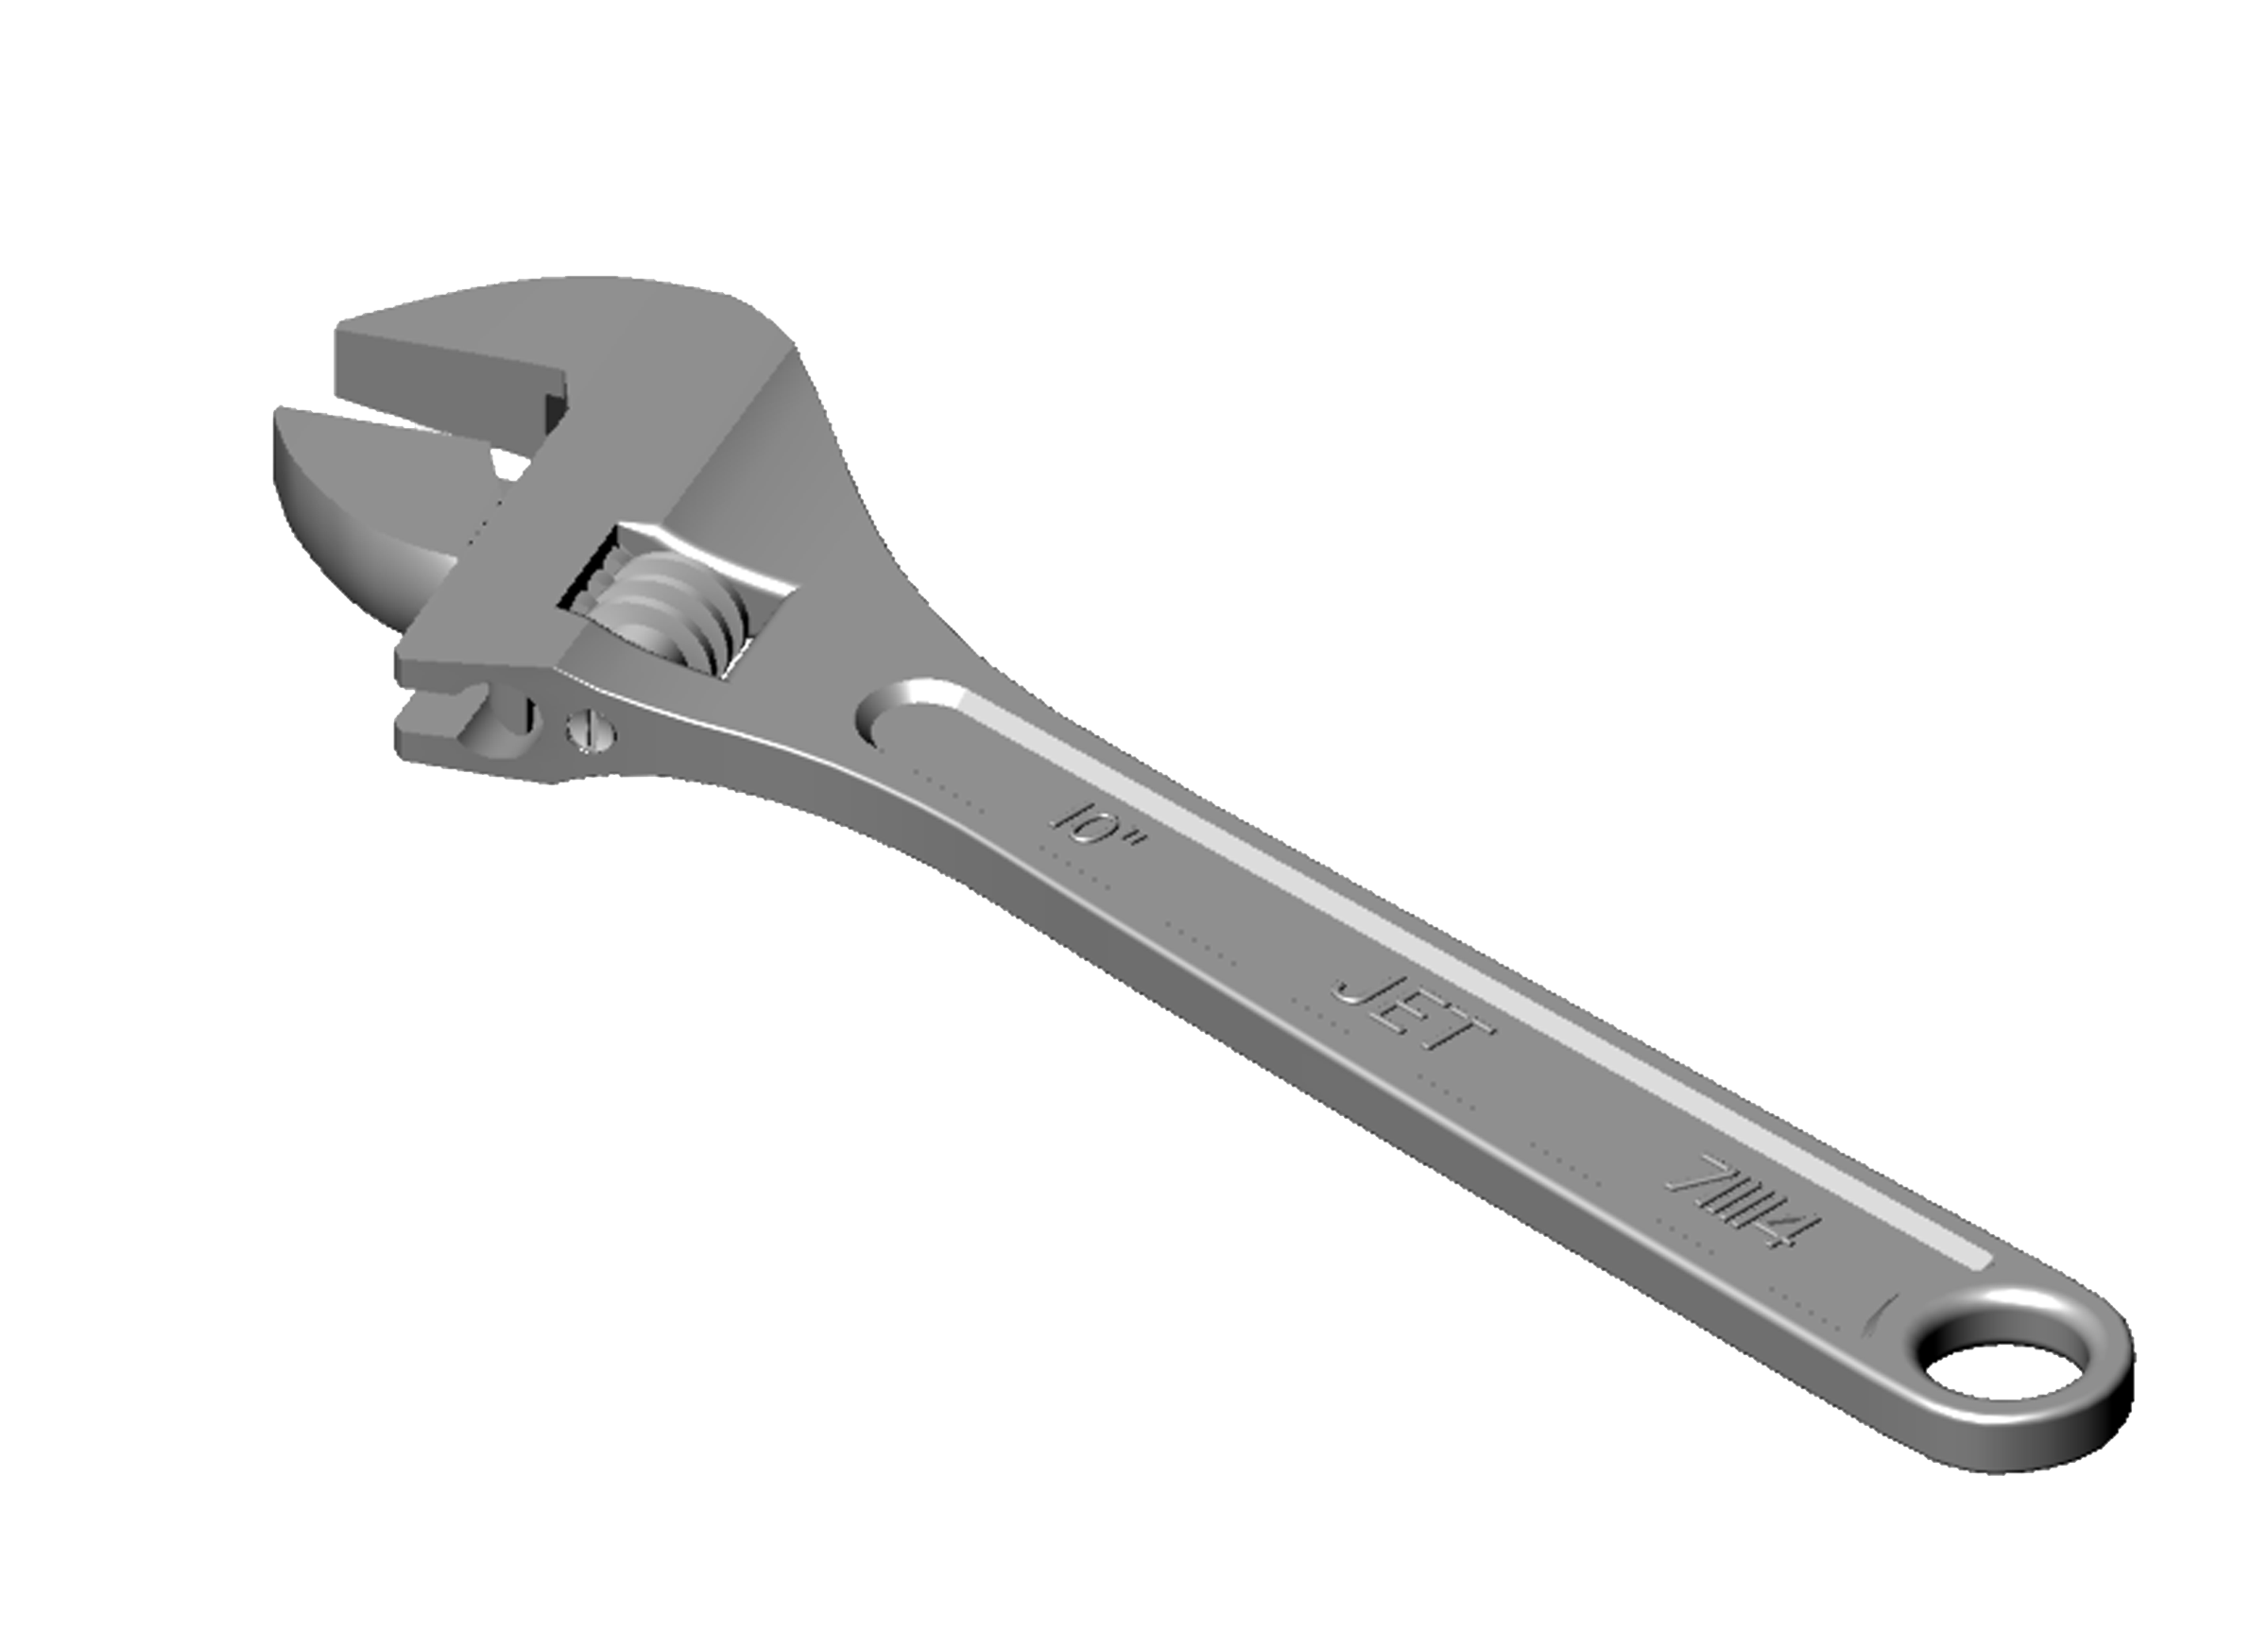 Wrench Png Clipart - Wrench, Transparent background PNG HD thumbnail